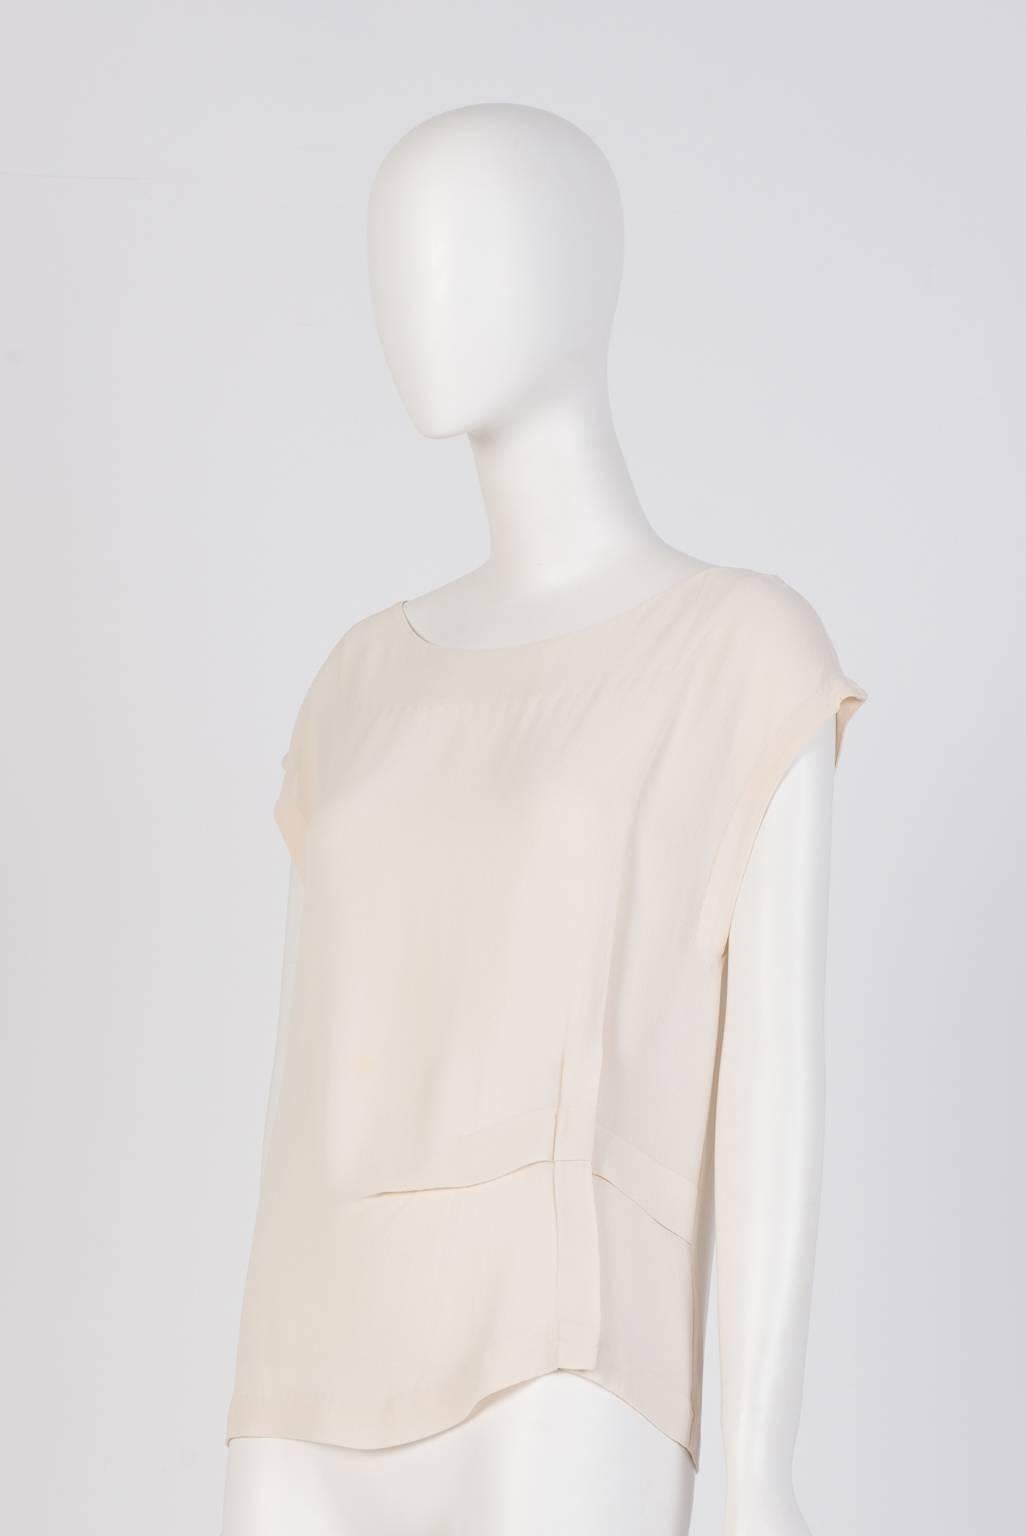 Dries Van Noten cap sleeve T-shirt in crepe fabric with a cross pleat detail on the low left. One minor tear around the right shoulder, please refer to image.